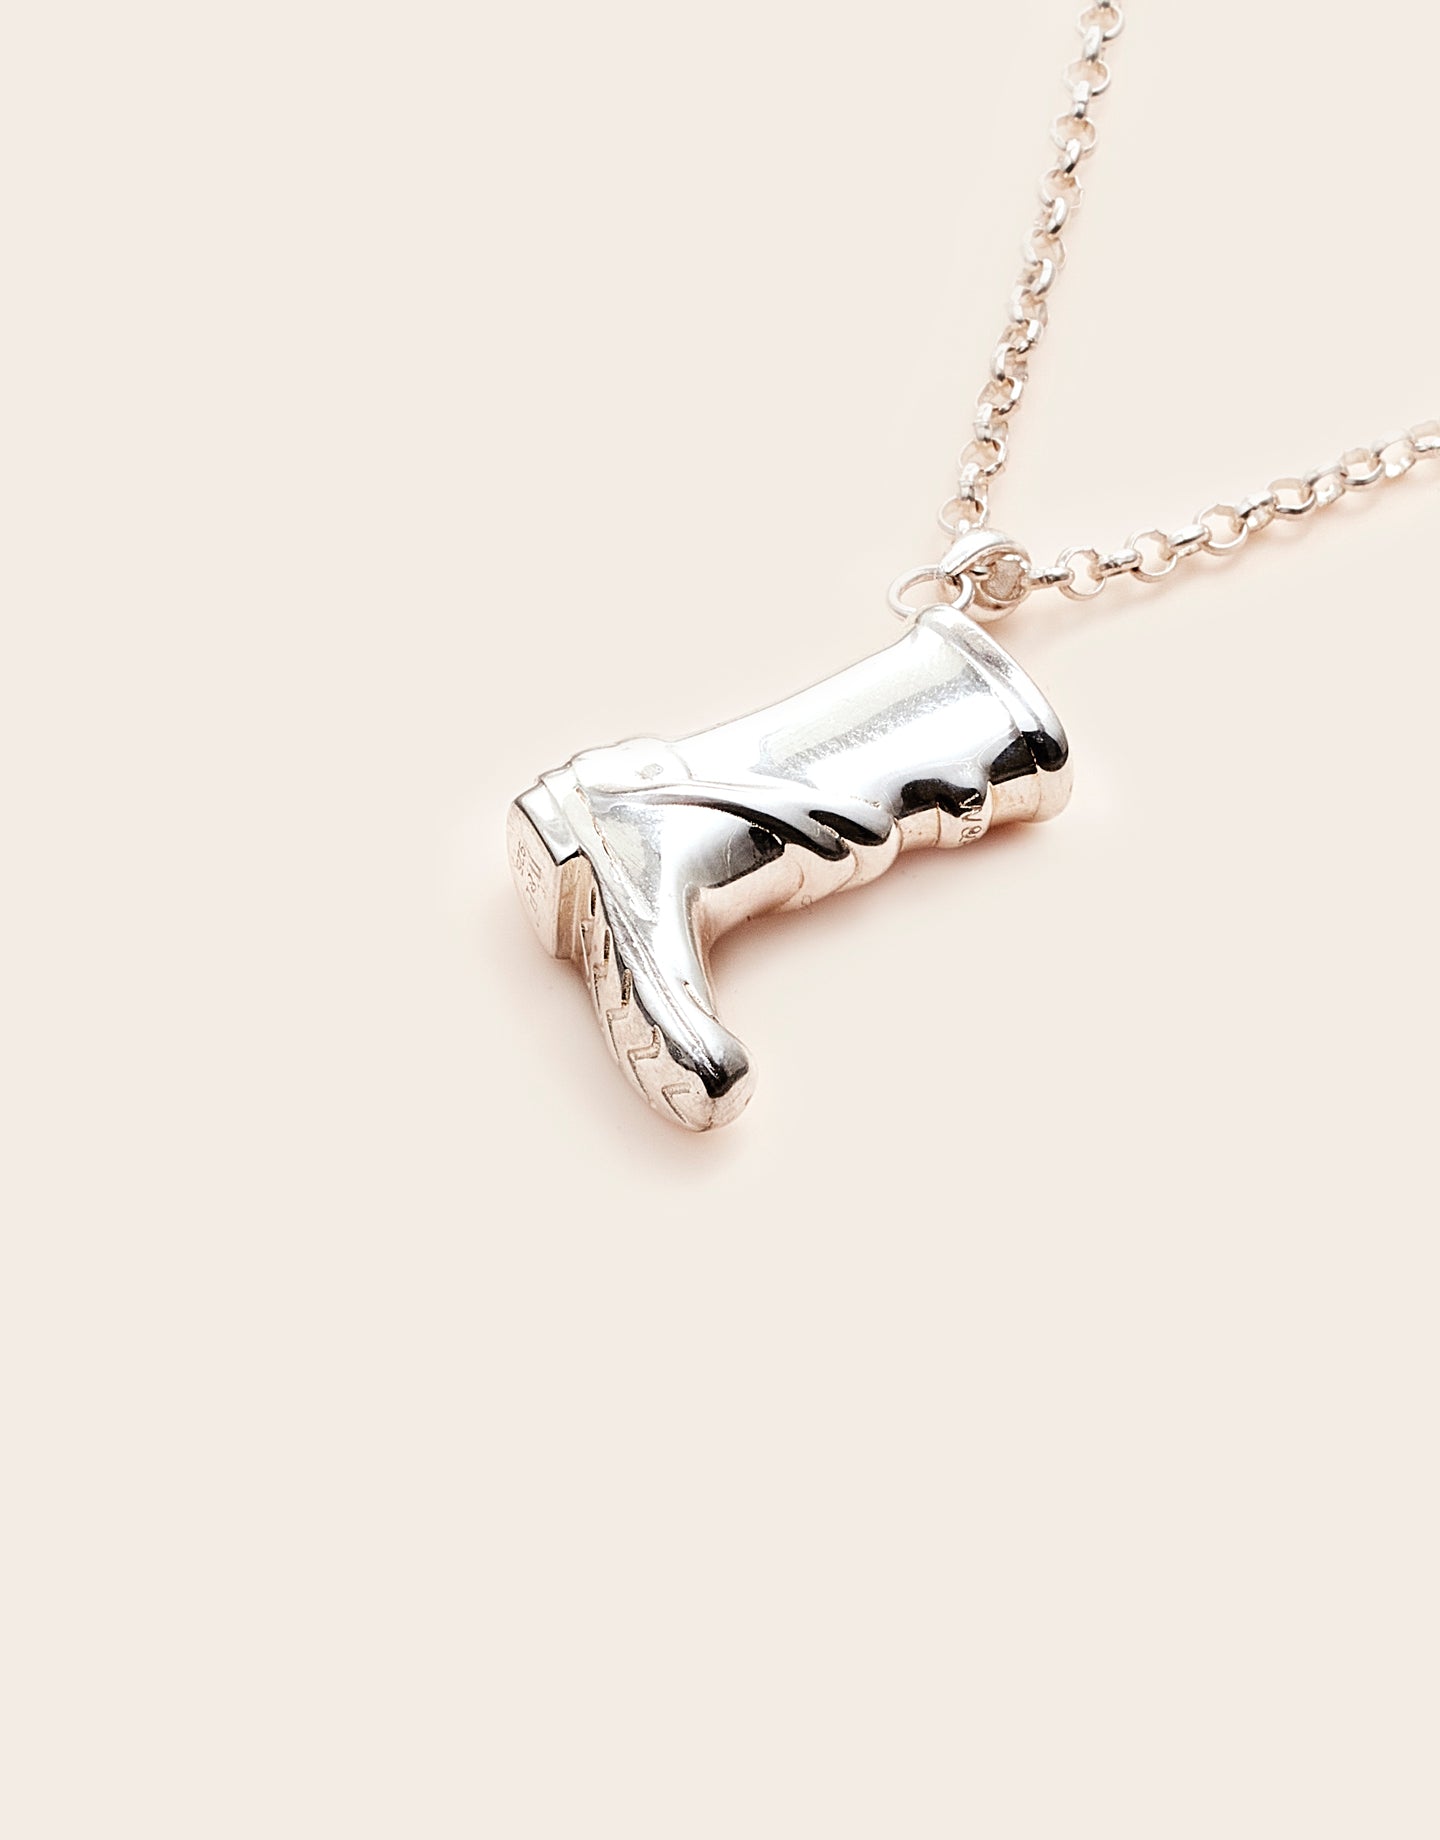 High Country Baby Gumboot Necklace